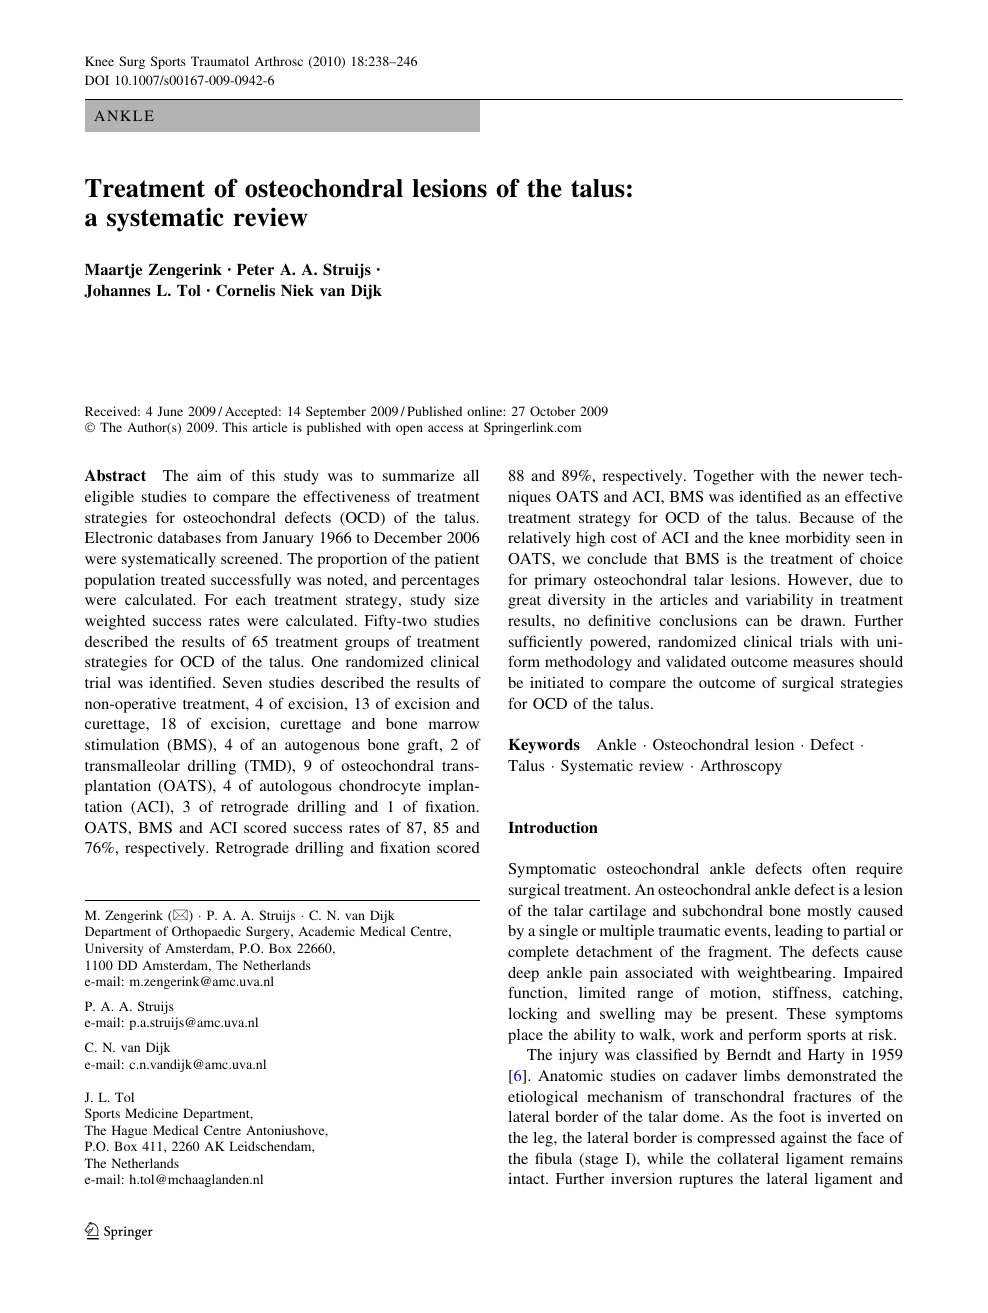 Treatment Of Osteochondral Lesions Of The Talus A Systematic Review Topic Of Research Paper In Clinical Medicine Download Scholarly Article Pdf And Read For Free On Cyberleninka Open Science Hub